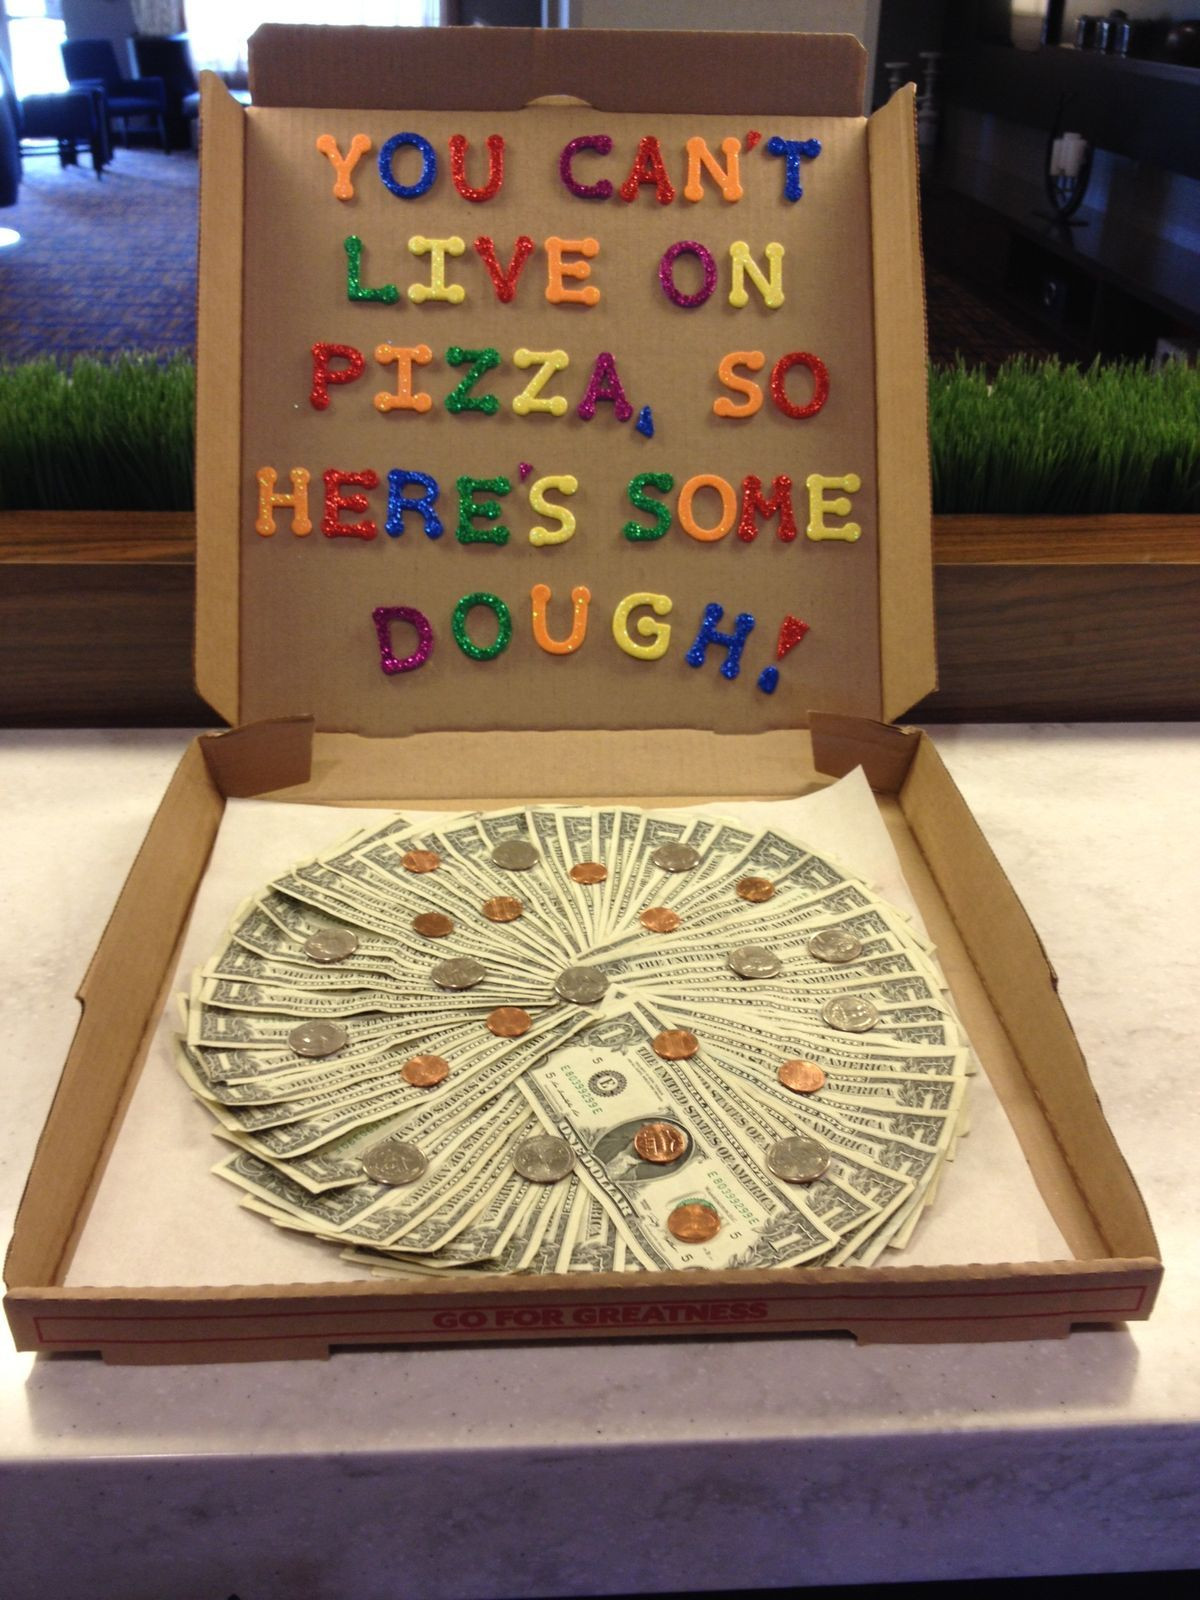 High School Graduation Party Ideas For Son
 You can t live on pizza so here s some dough fun way